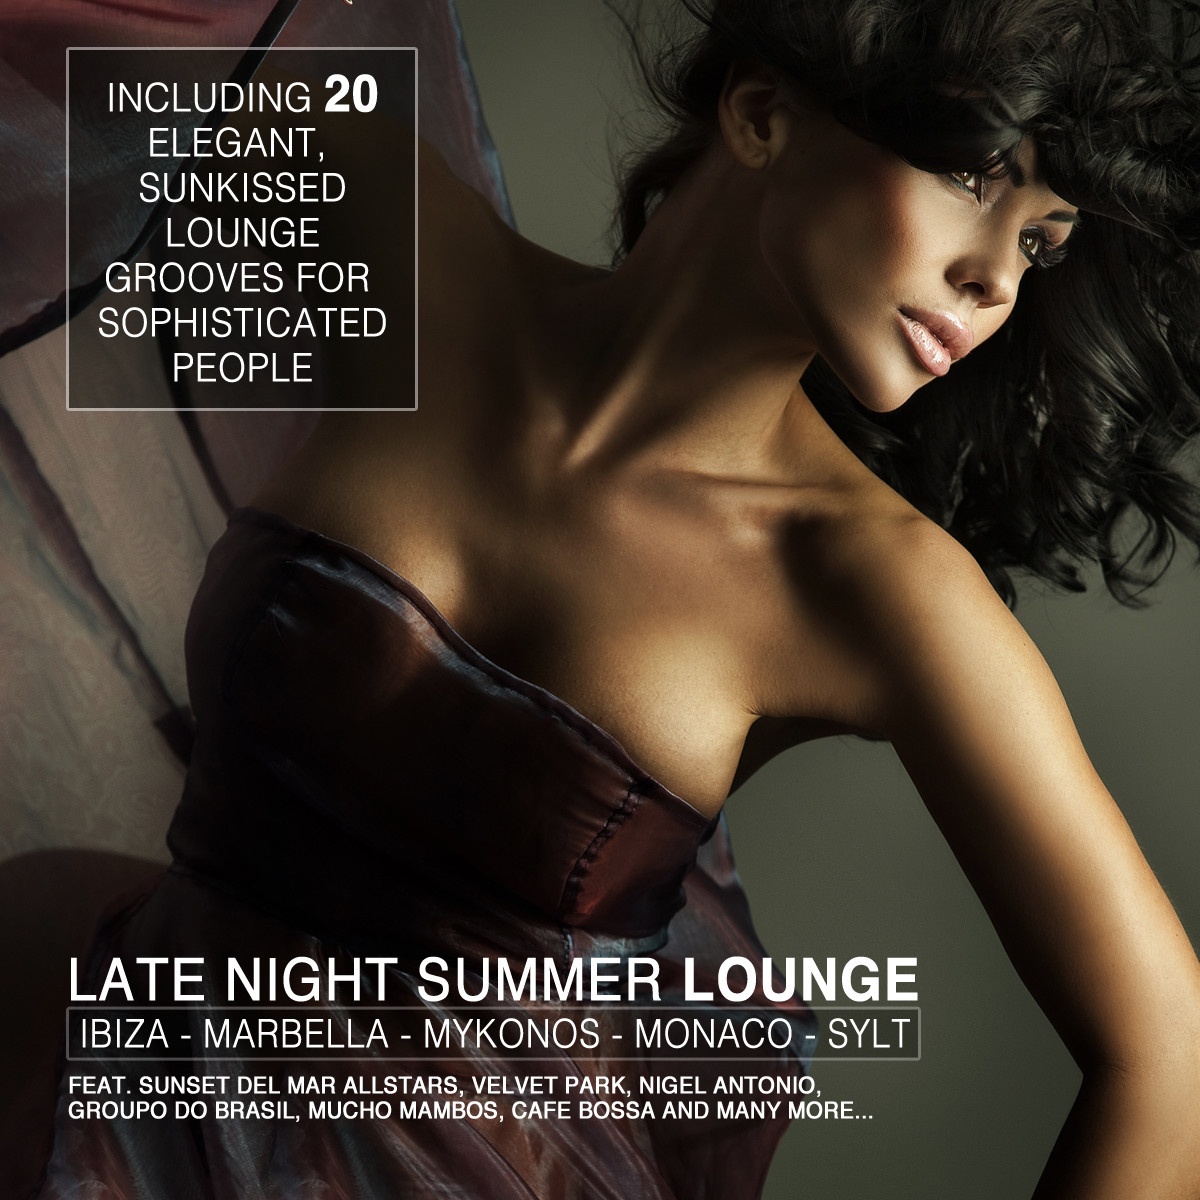 Project Deluxe (Lounge After 8 P.m. Mix)